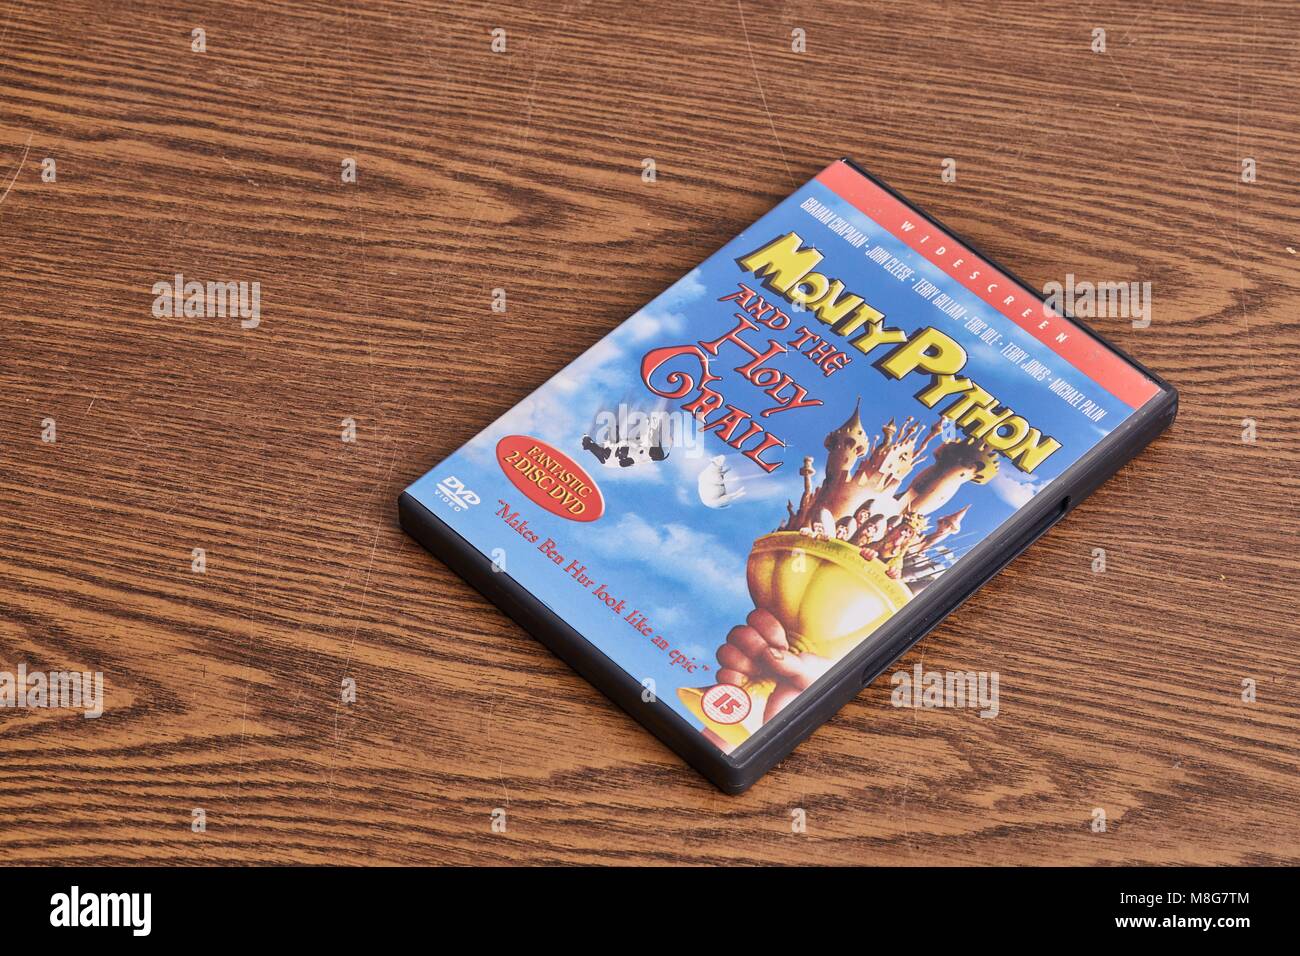 Monty Python and The Holy Grail DVD Stock Photo